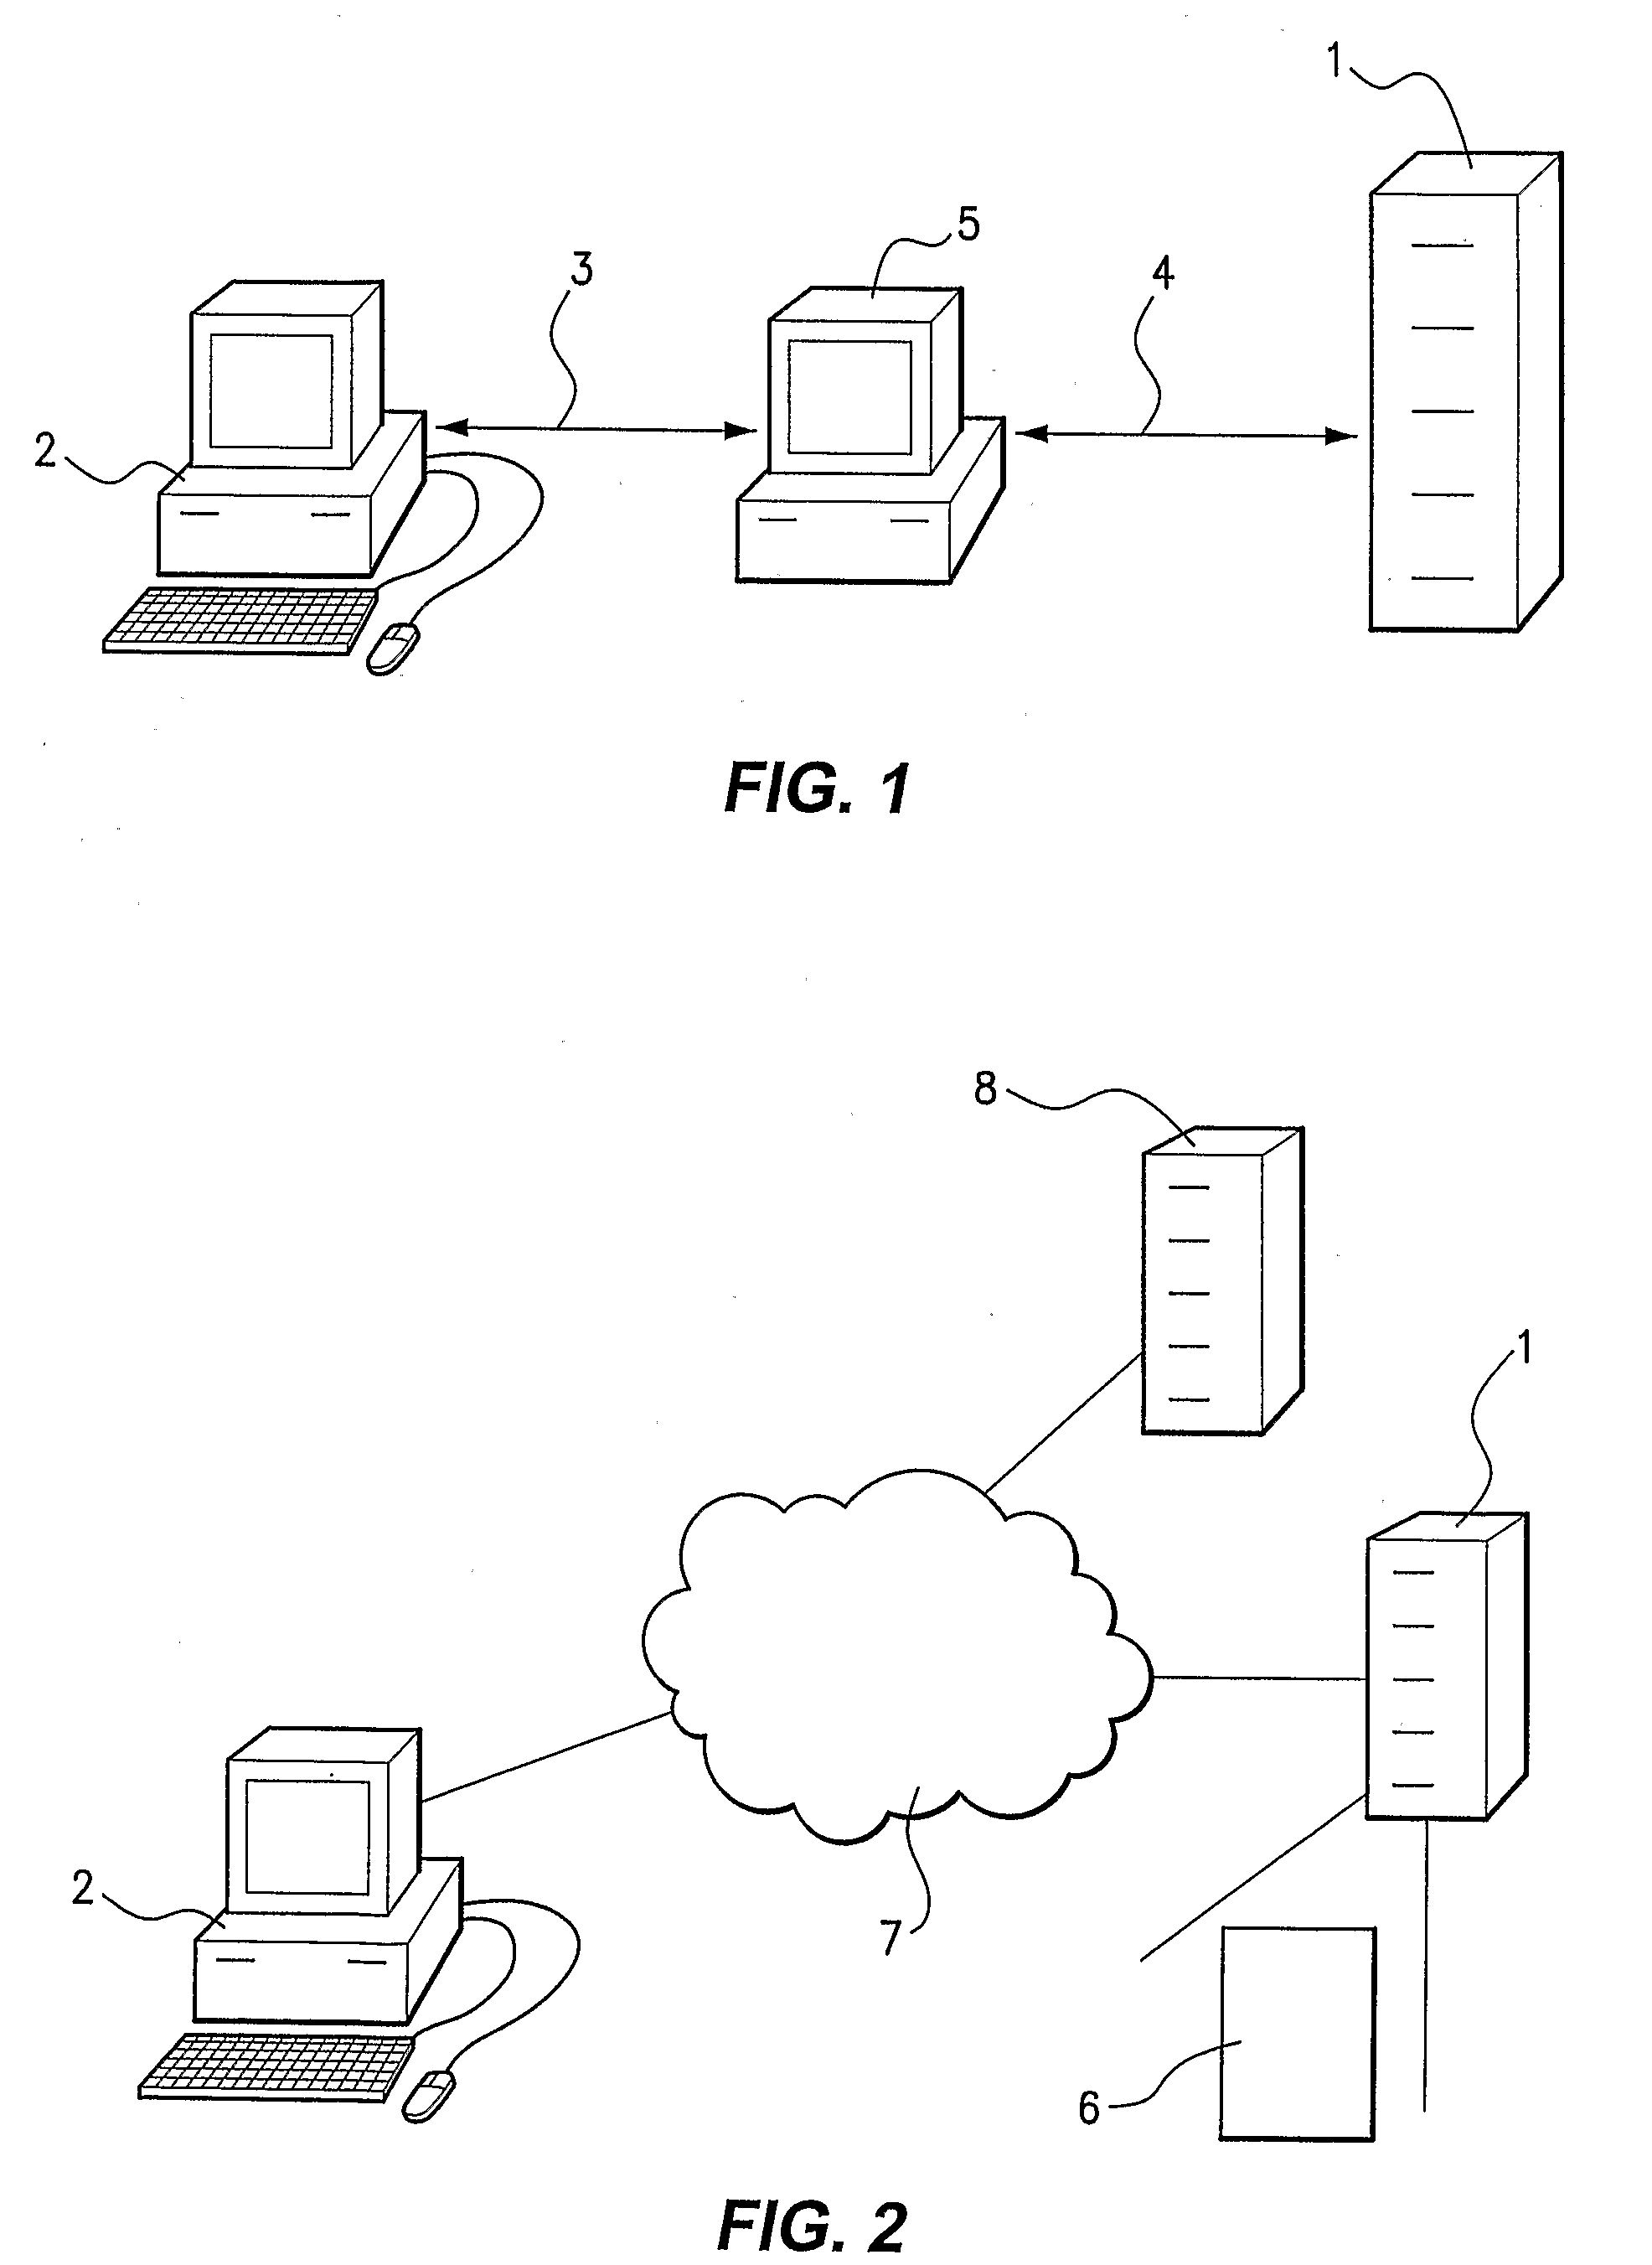 Method and Apparatus for Facilitating a Secure Transaction